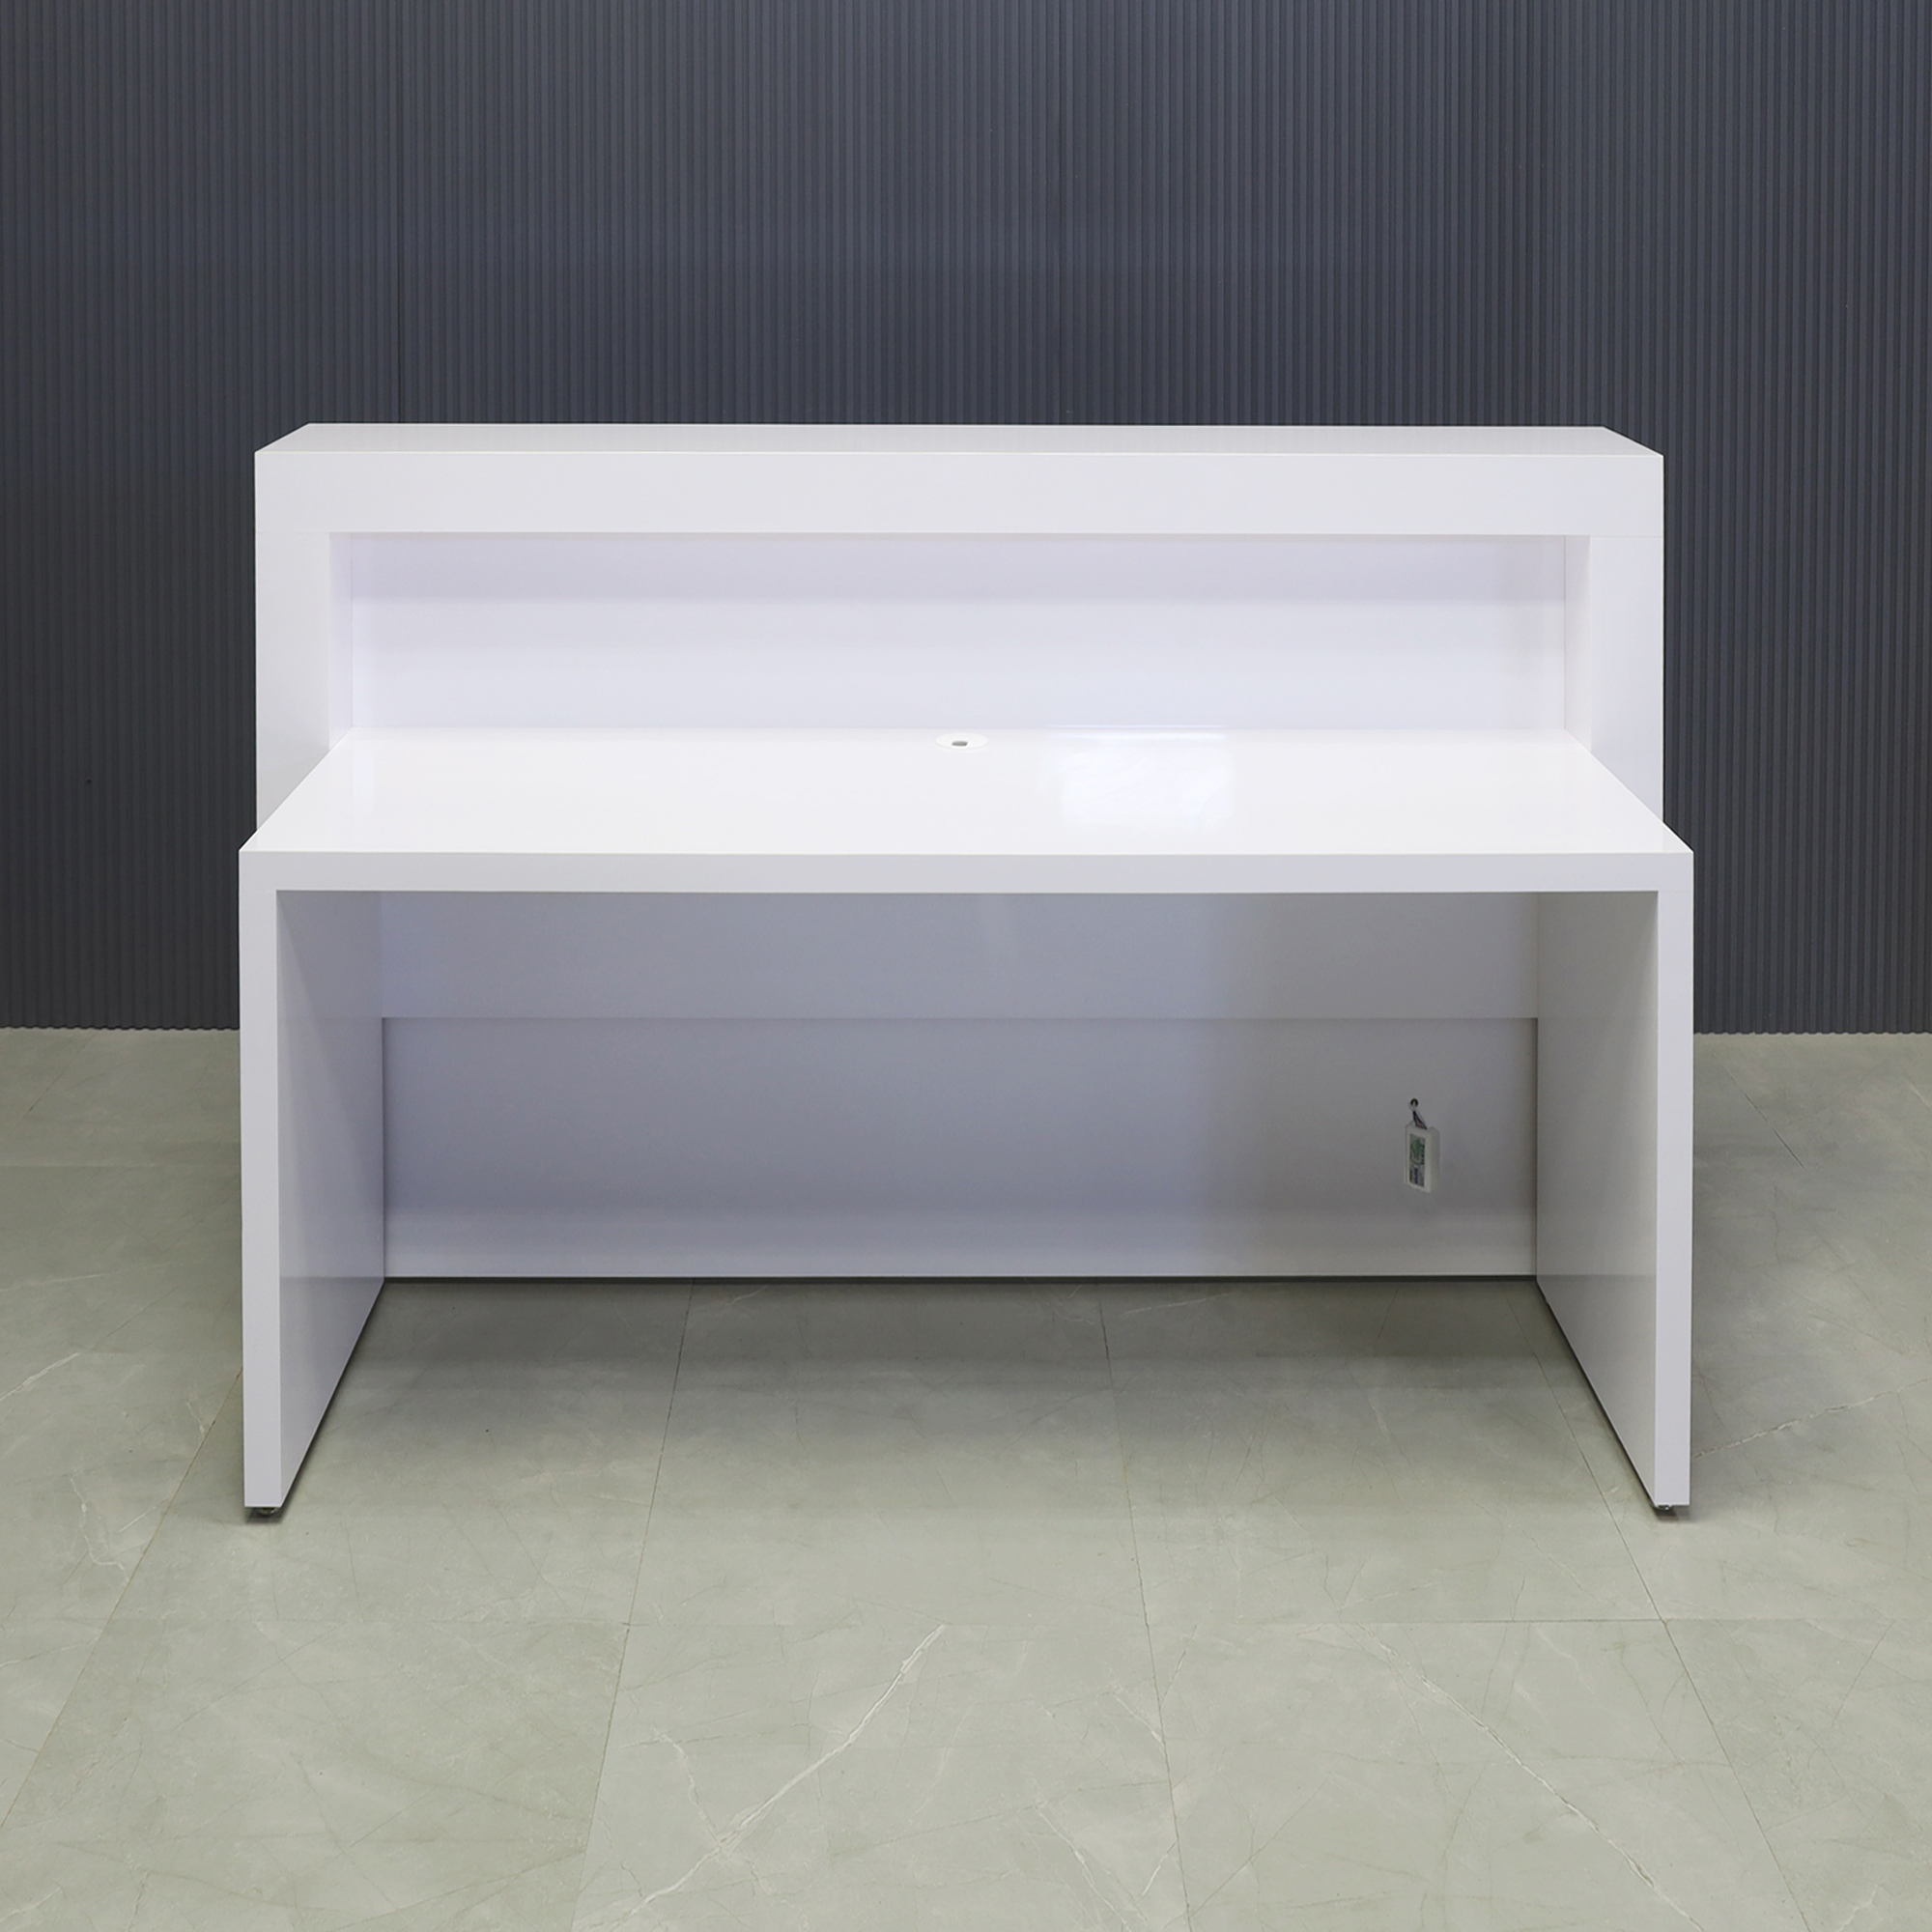 60-inch New York Straight Reception Desk in white gloss laminate finish, with multi-colored LED, shown here.